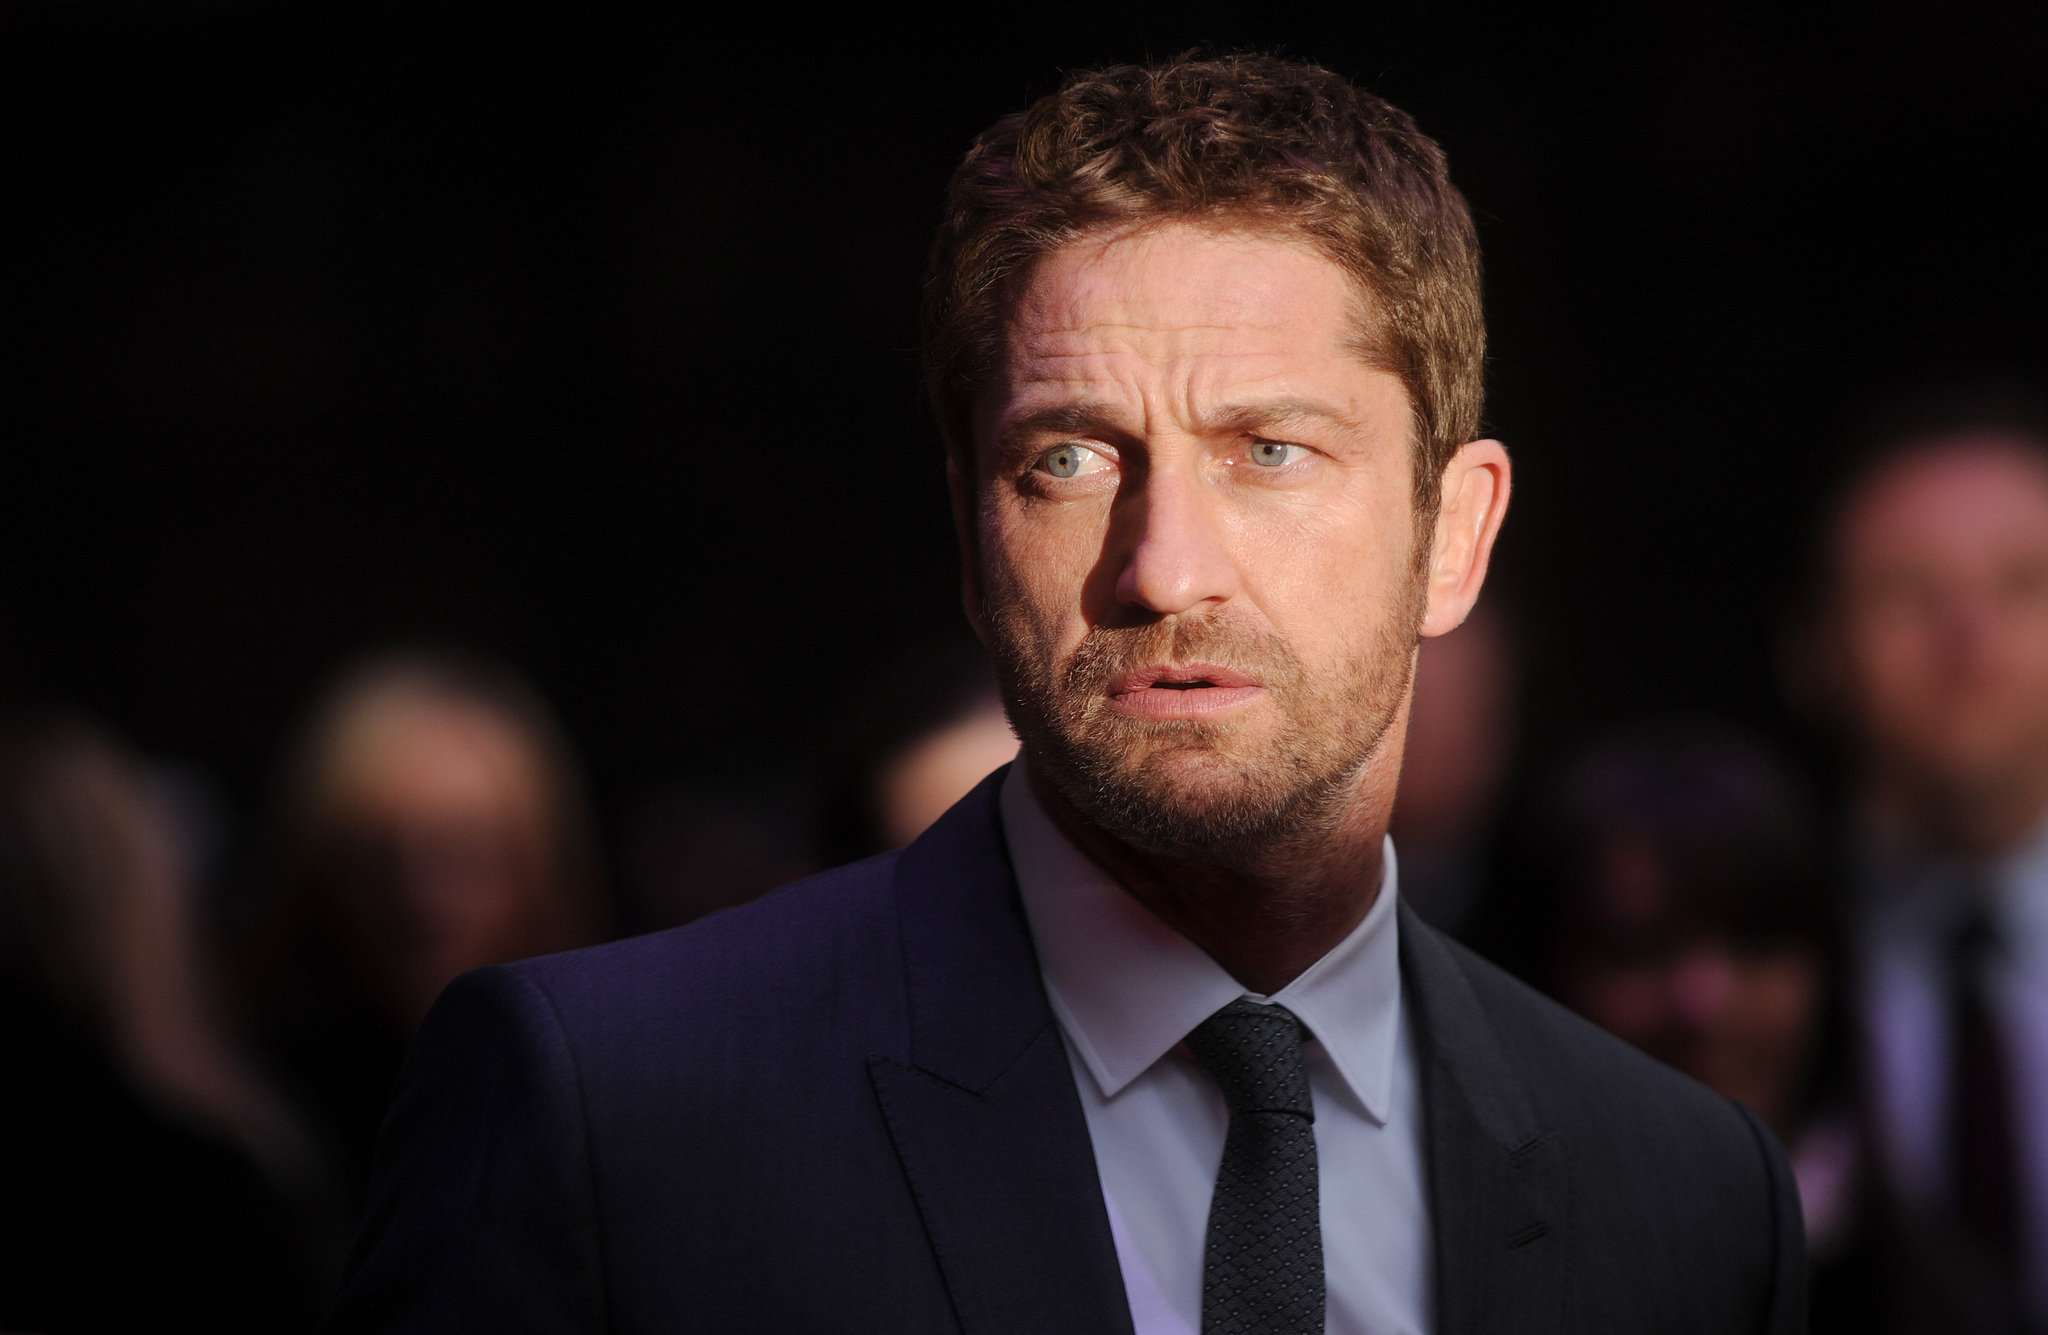 Gerard Butler at event of Olimpo apgultis (2013)